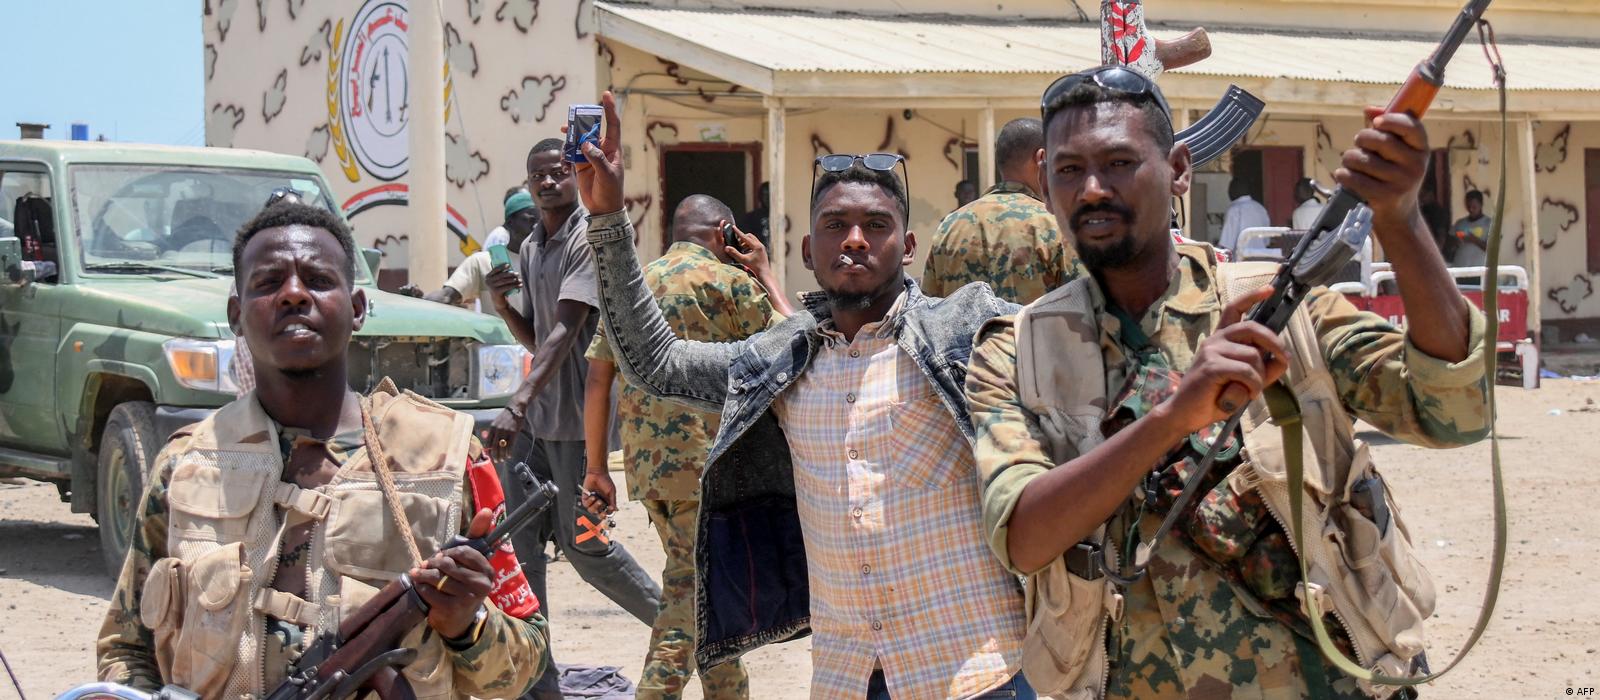 Security forces are at war in Sudan. (Punch)